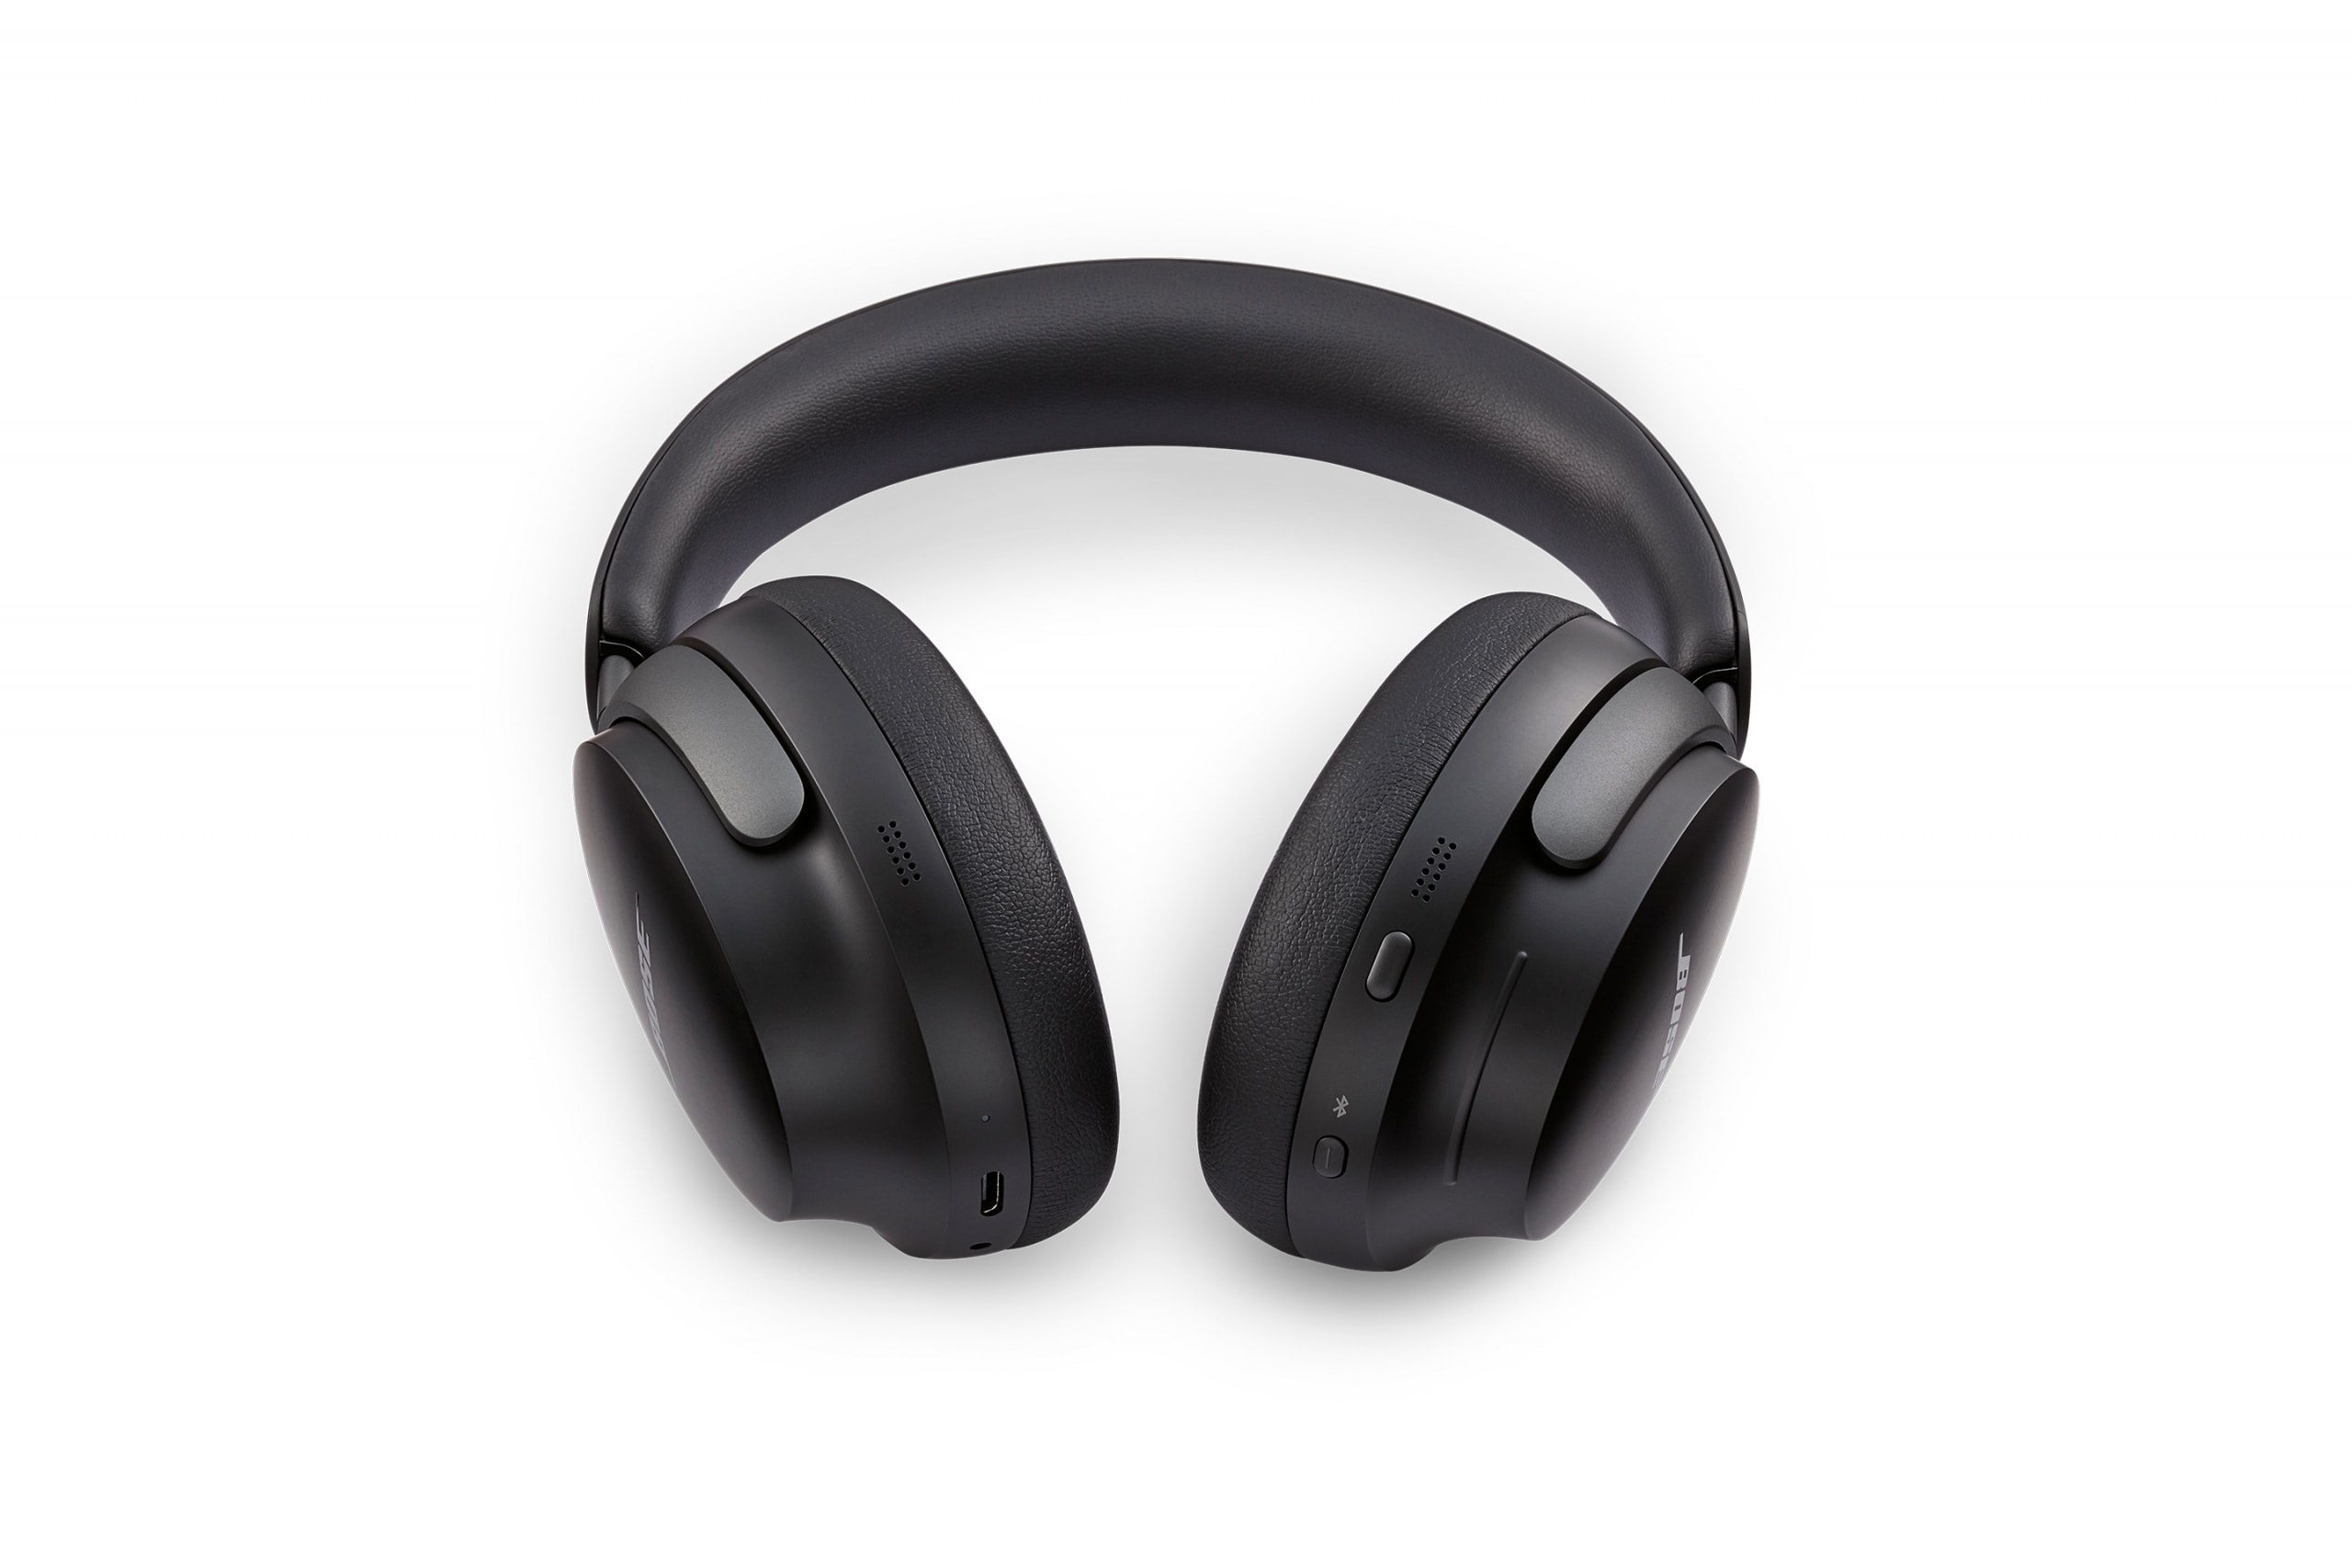 Bose Launches New QuietComfort Ultra Headphones and Earbuds As Part Of Updated Flagship Lineup Premium Wireless Headphones